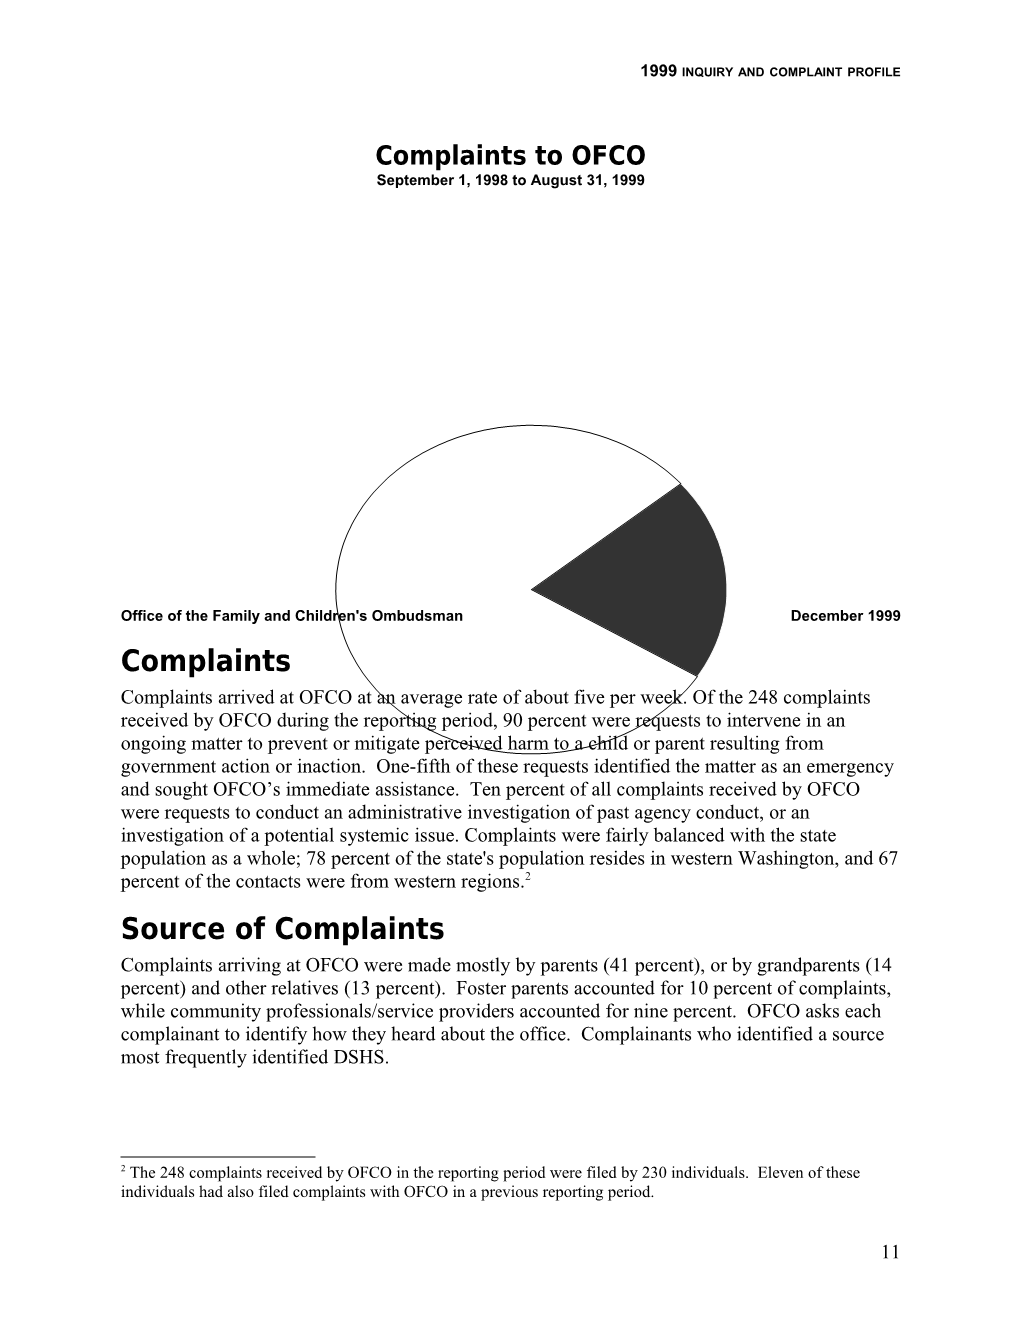 1999 Inquiry and Complaint Profile